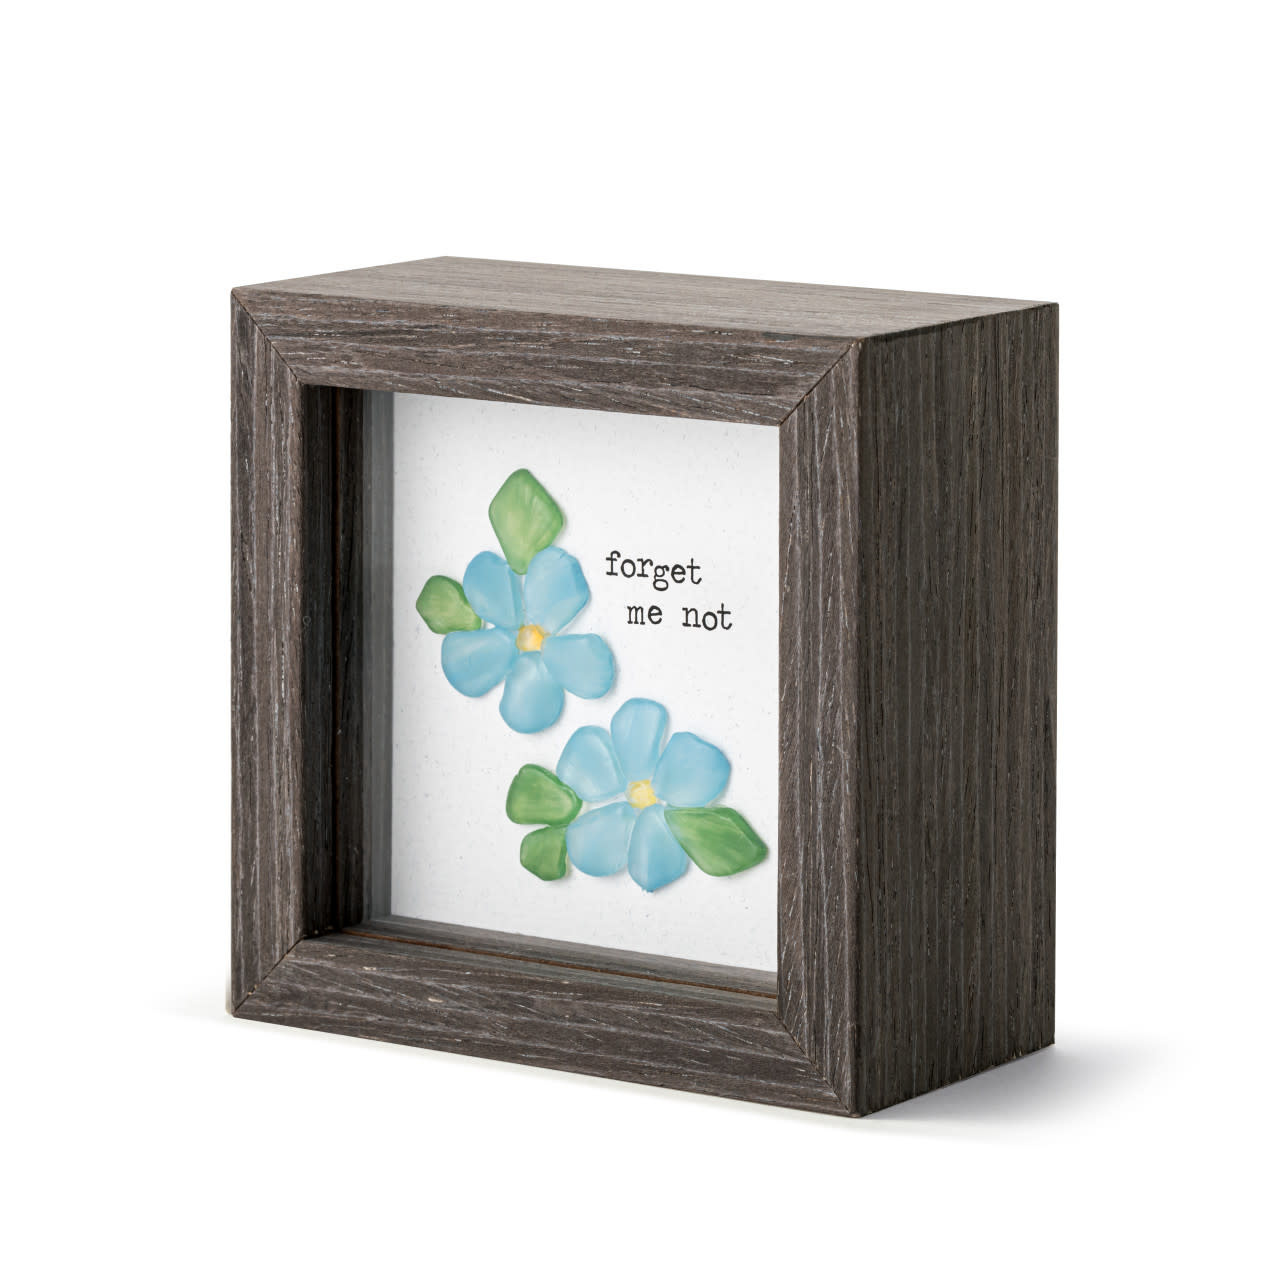 Sharon Nowlan Forget Me Not Shadow Box